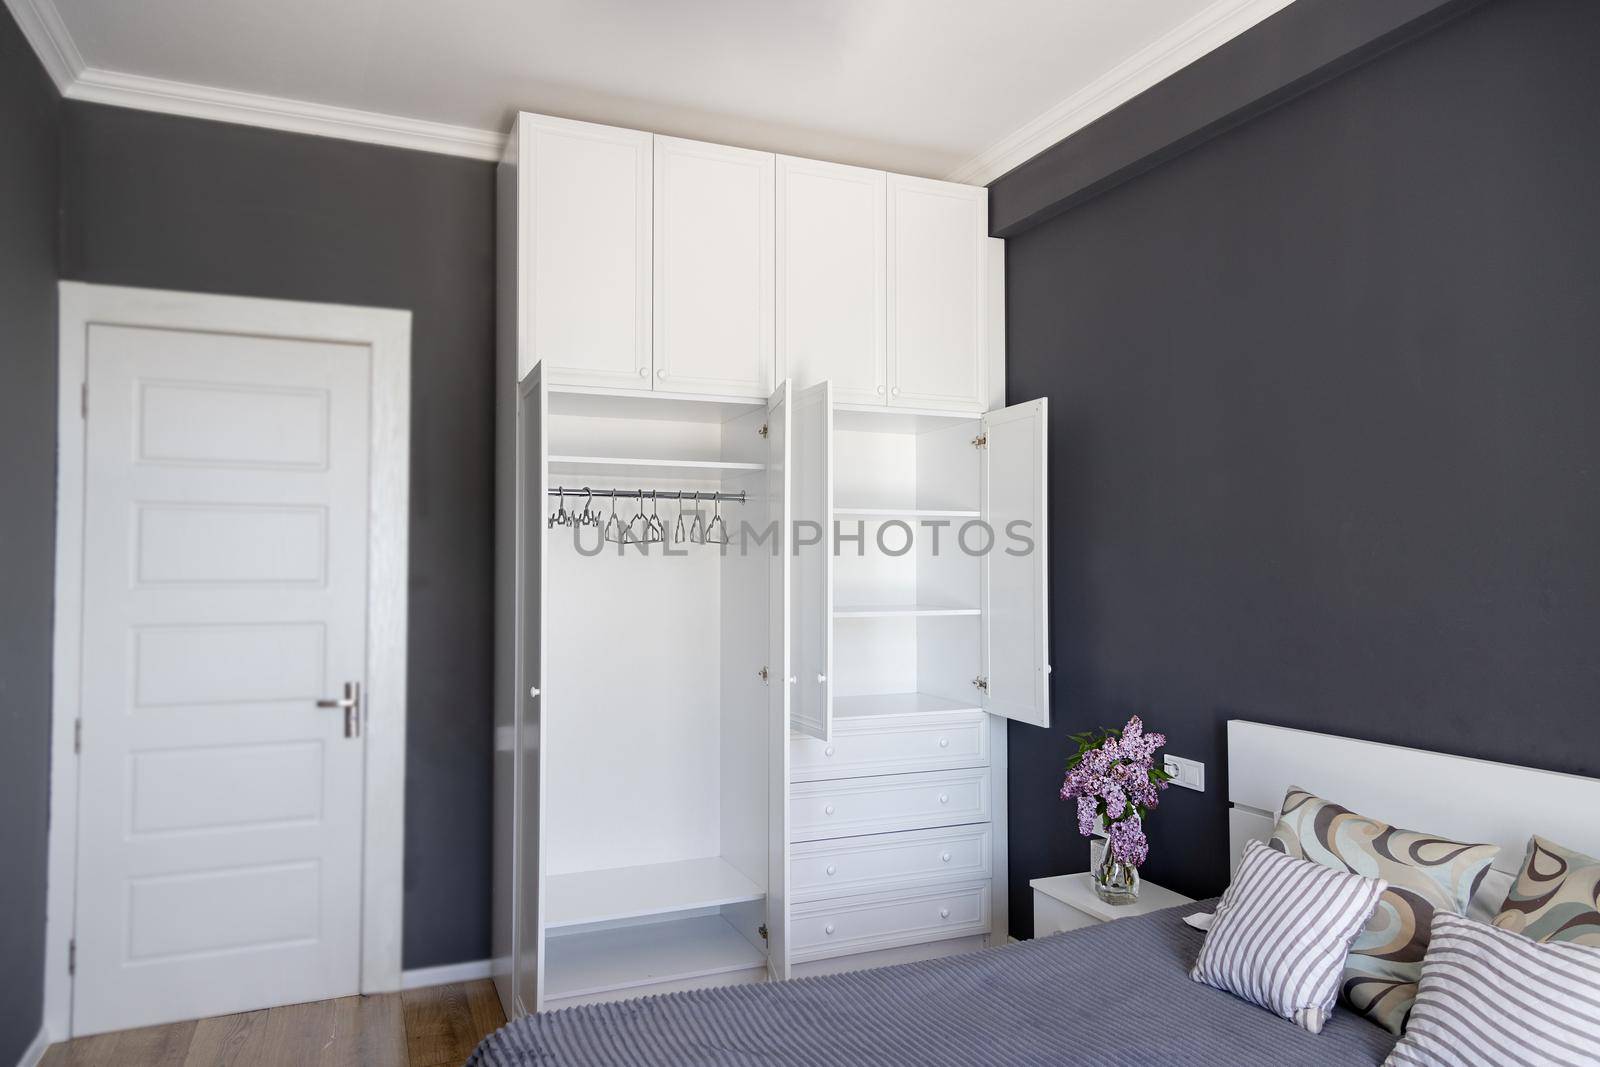 In a dark room, in the bedroom there is light furniture. Minimalistic apartments. White empty wardrobe with open doors and empty shelves. The concept of a new house, moving. Leave your accommodation